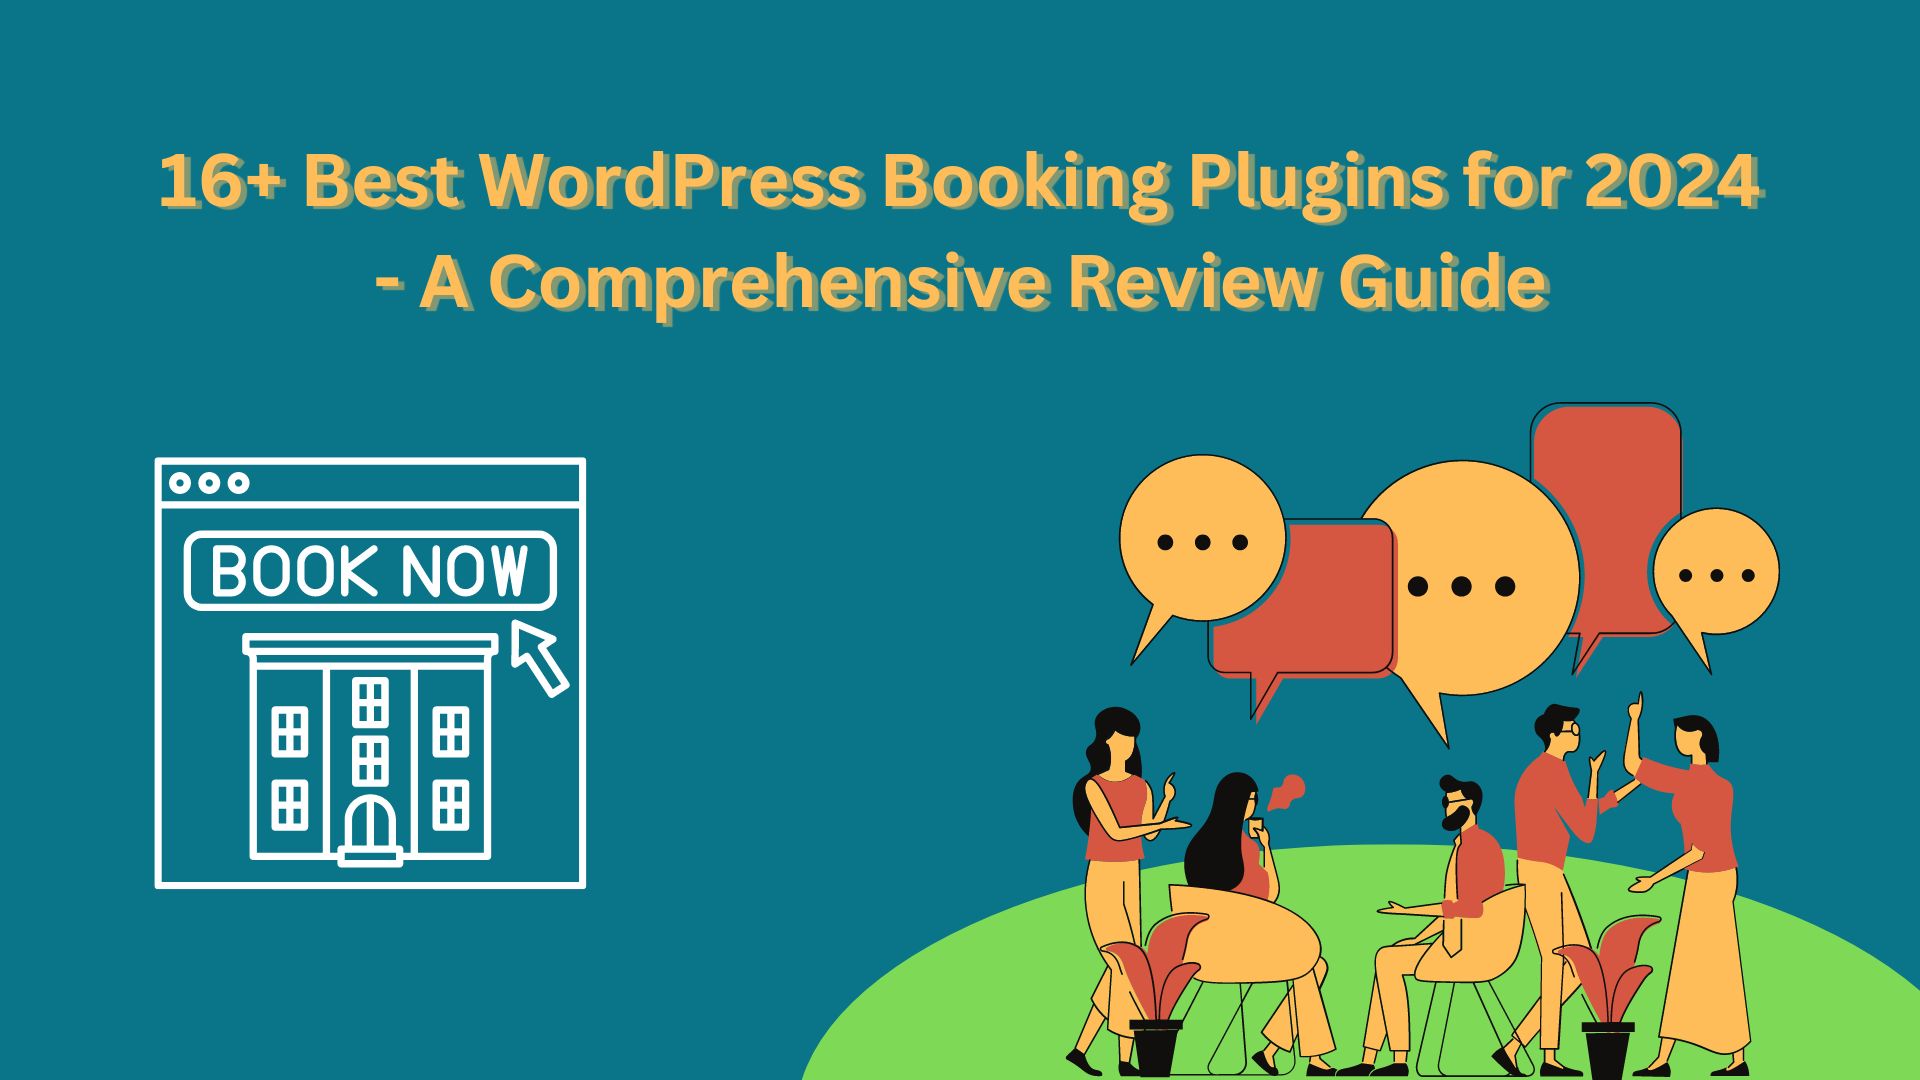 16+ Best WordPress Booking Plugins for 2024 - A Comprehensive Review Guide